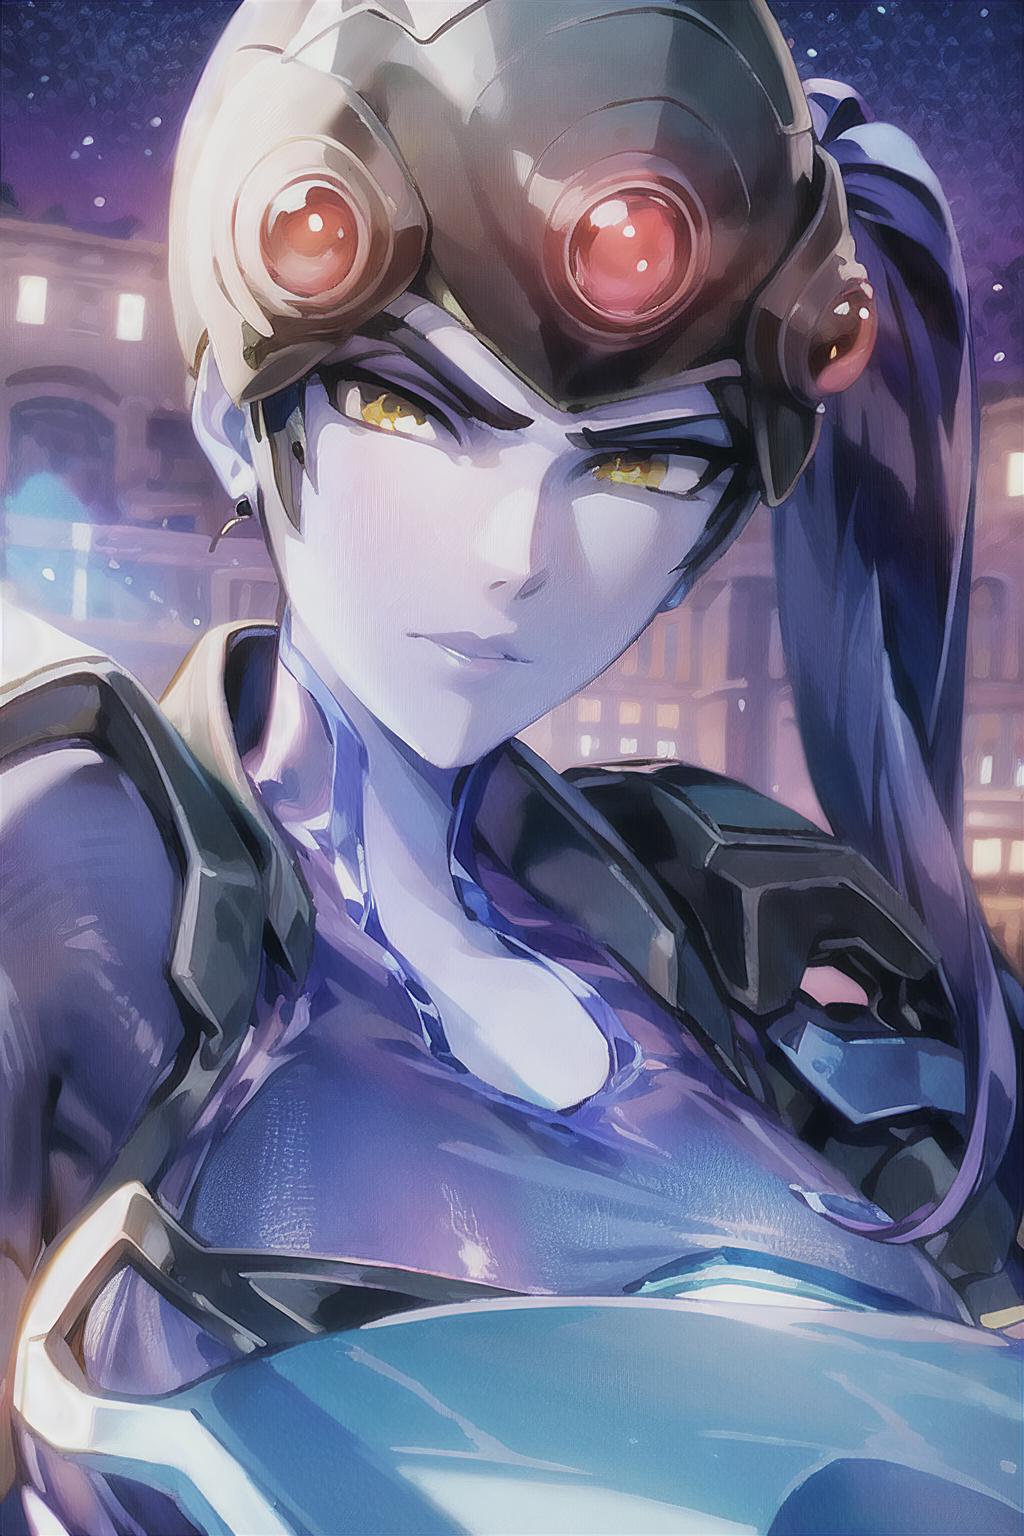 Widowmaker image by Entimesis